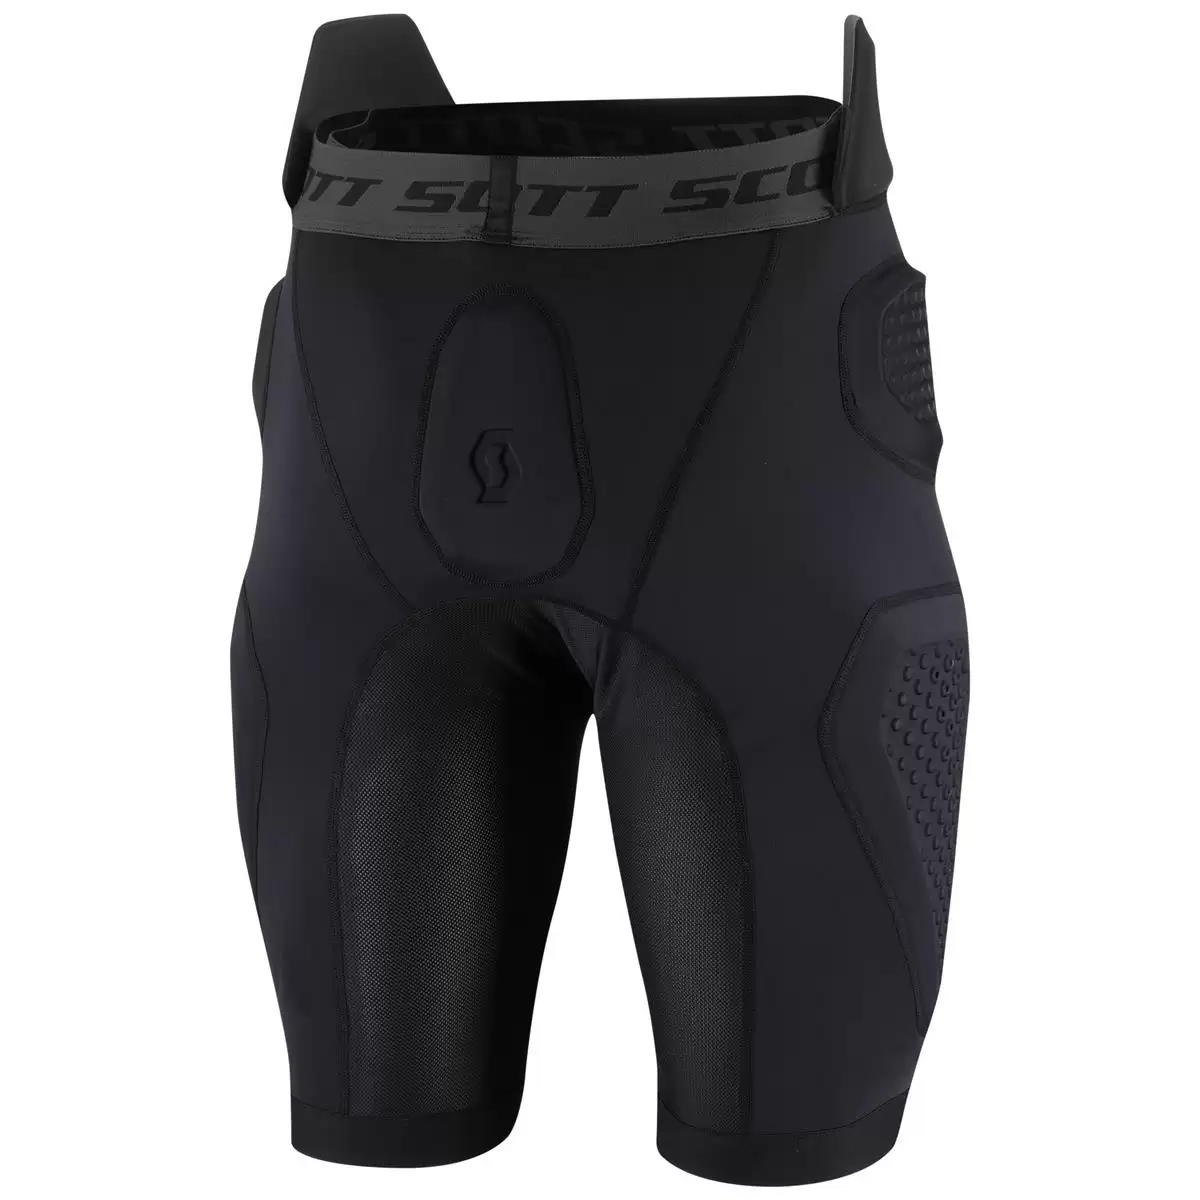 Short protector Softcon air black - Size XL #1